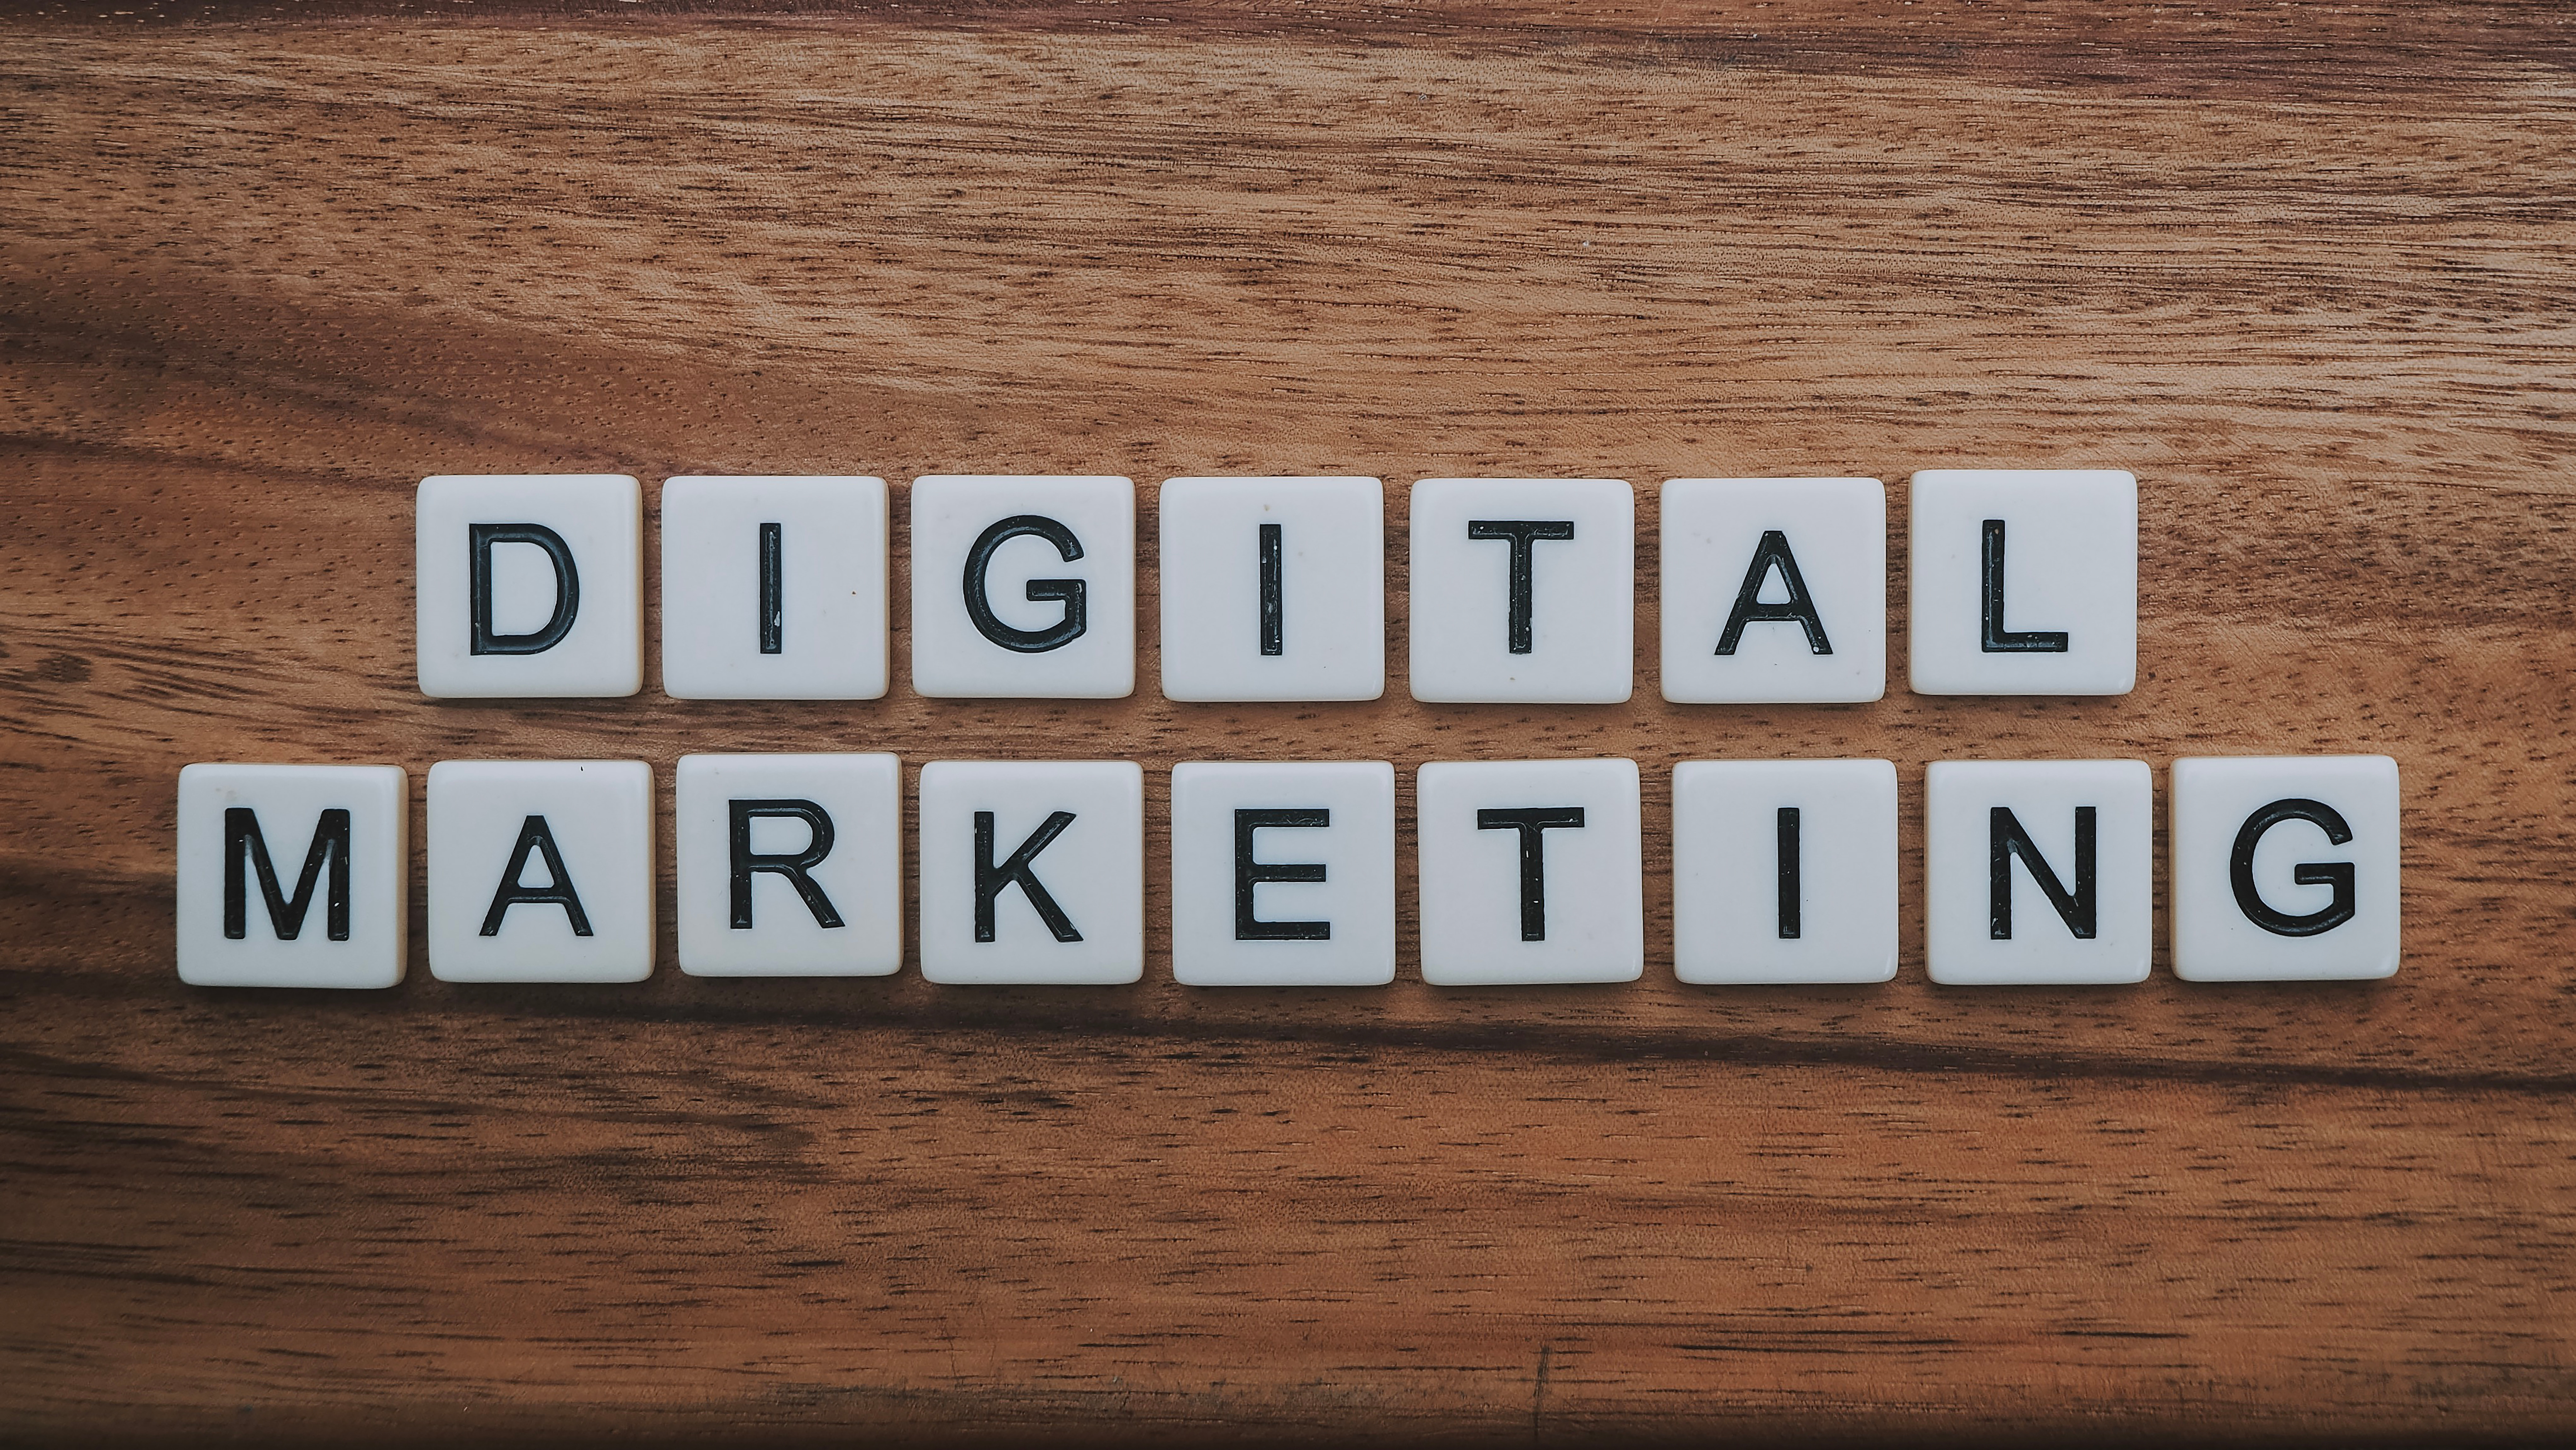 7 Must-Have Digital Marketing Tools for Businesses in 2022